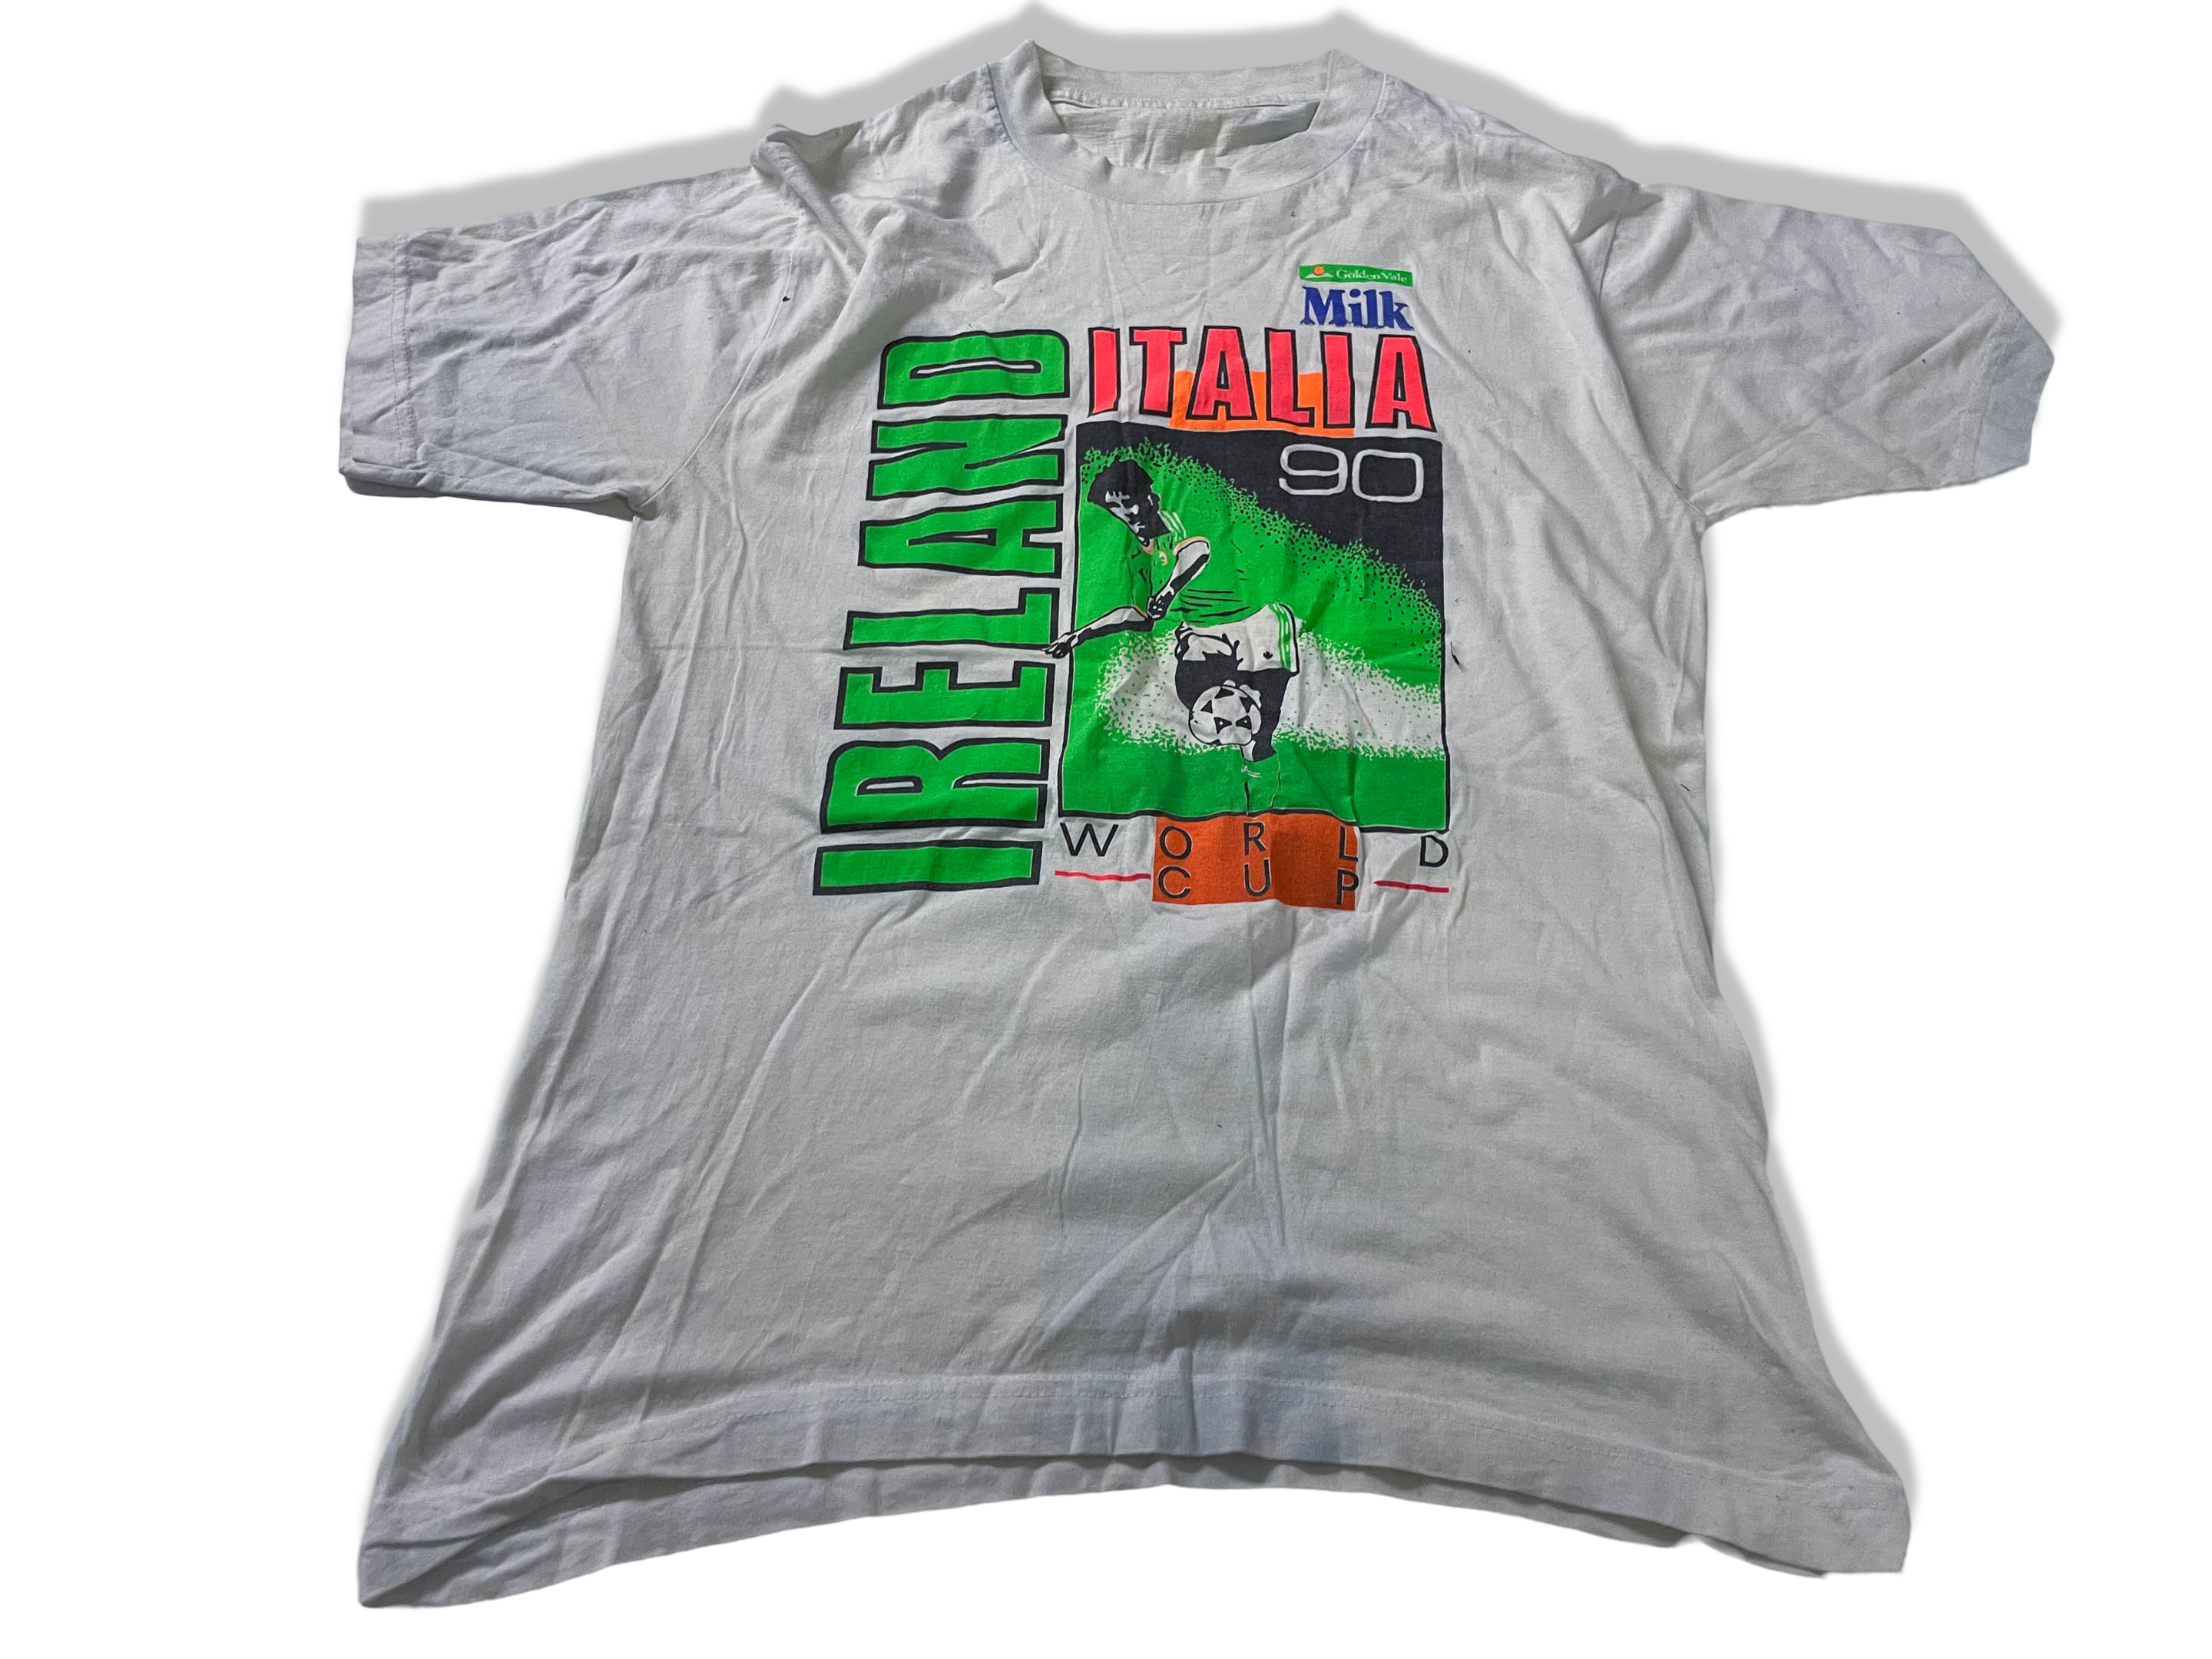 Vintage men's Ireland Italia 1990 world cup graphics white tees in S|L27 W17| SKU 4143